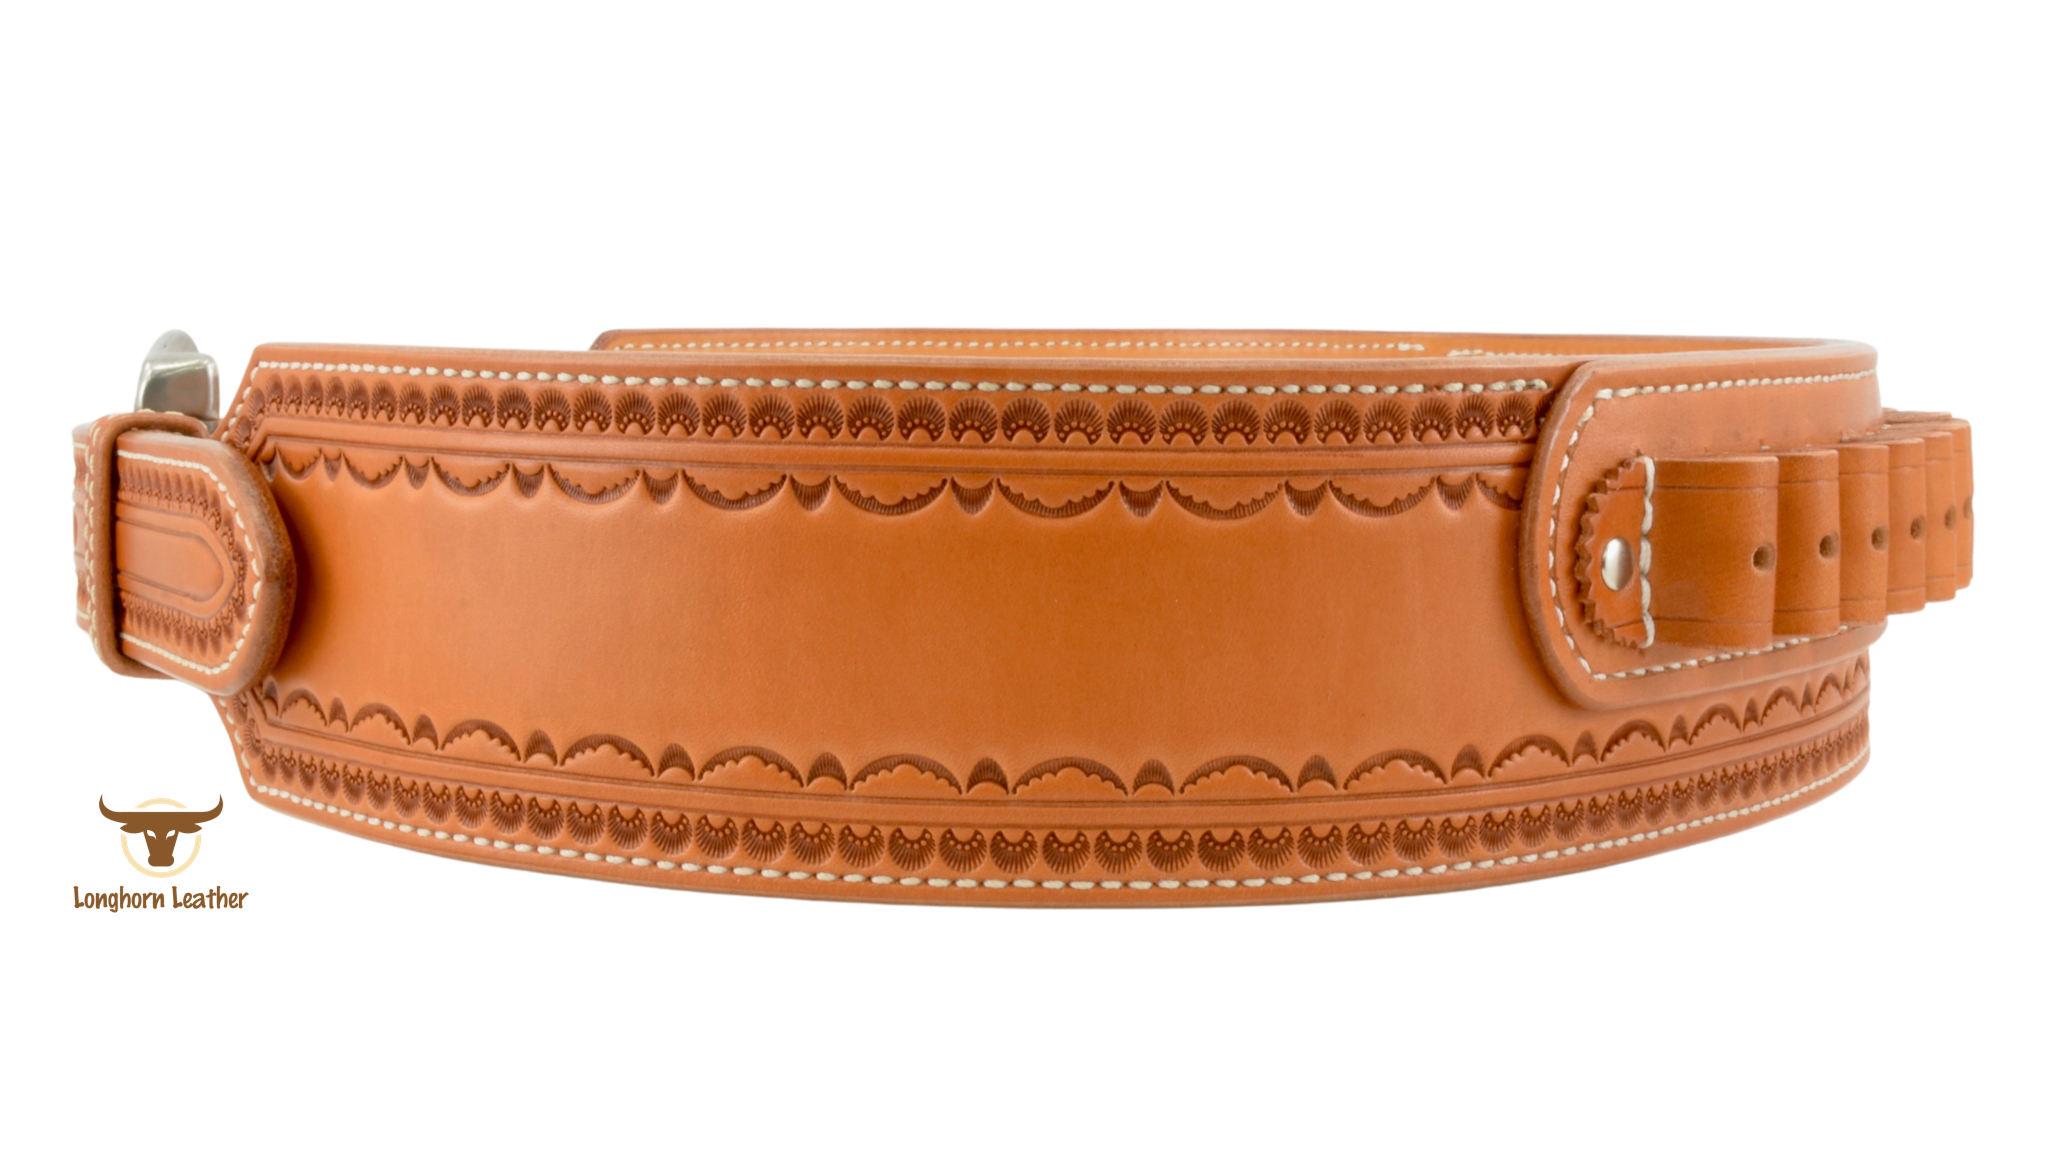 Custom leather cartridge belt featuring the "Deadwood" design.  Individually handcrafted at Longhorn Leather AZ.